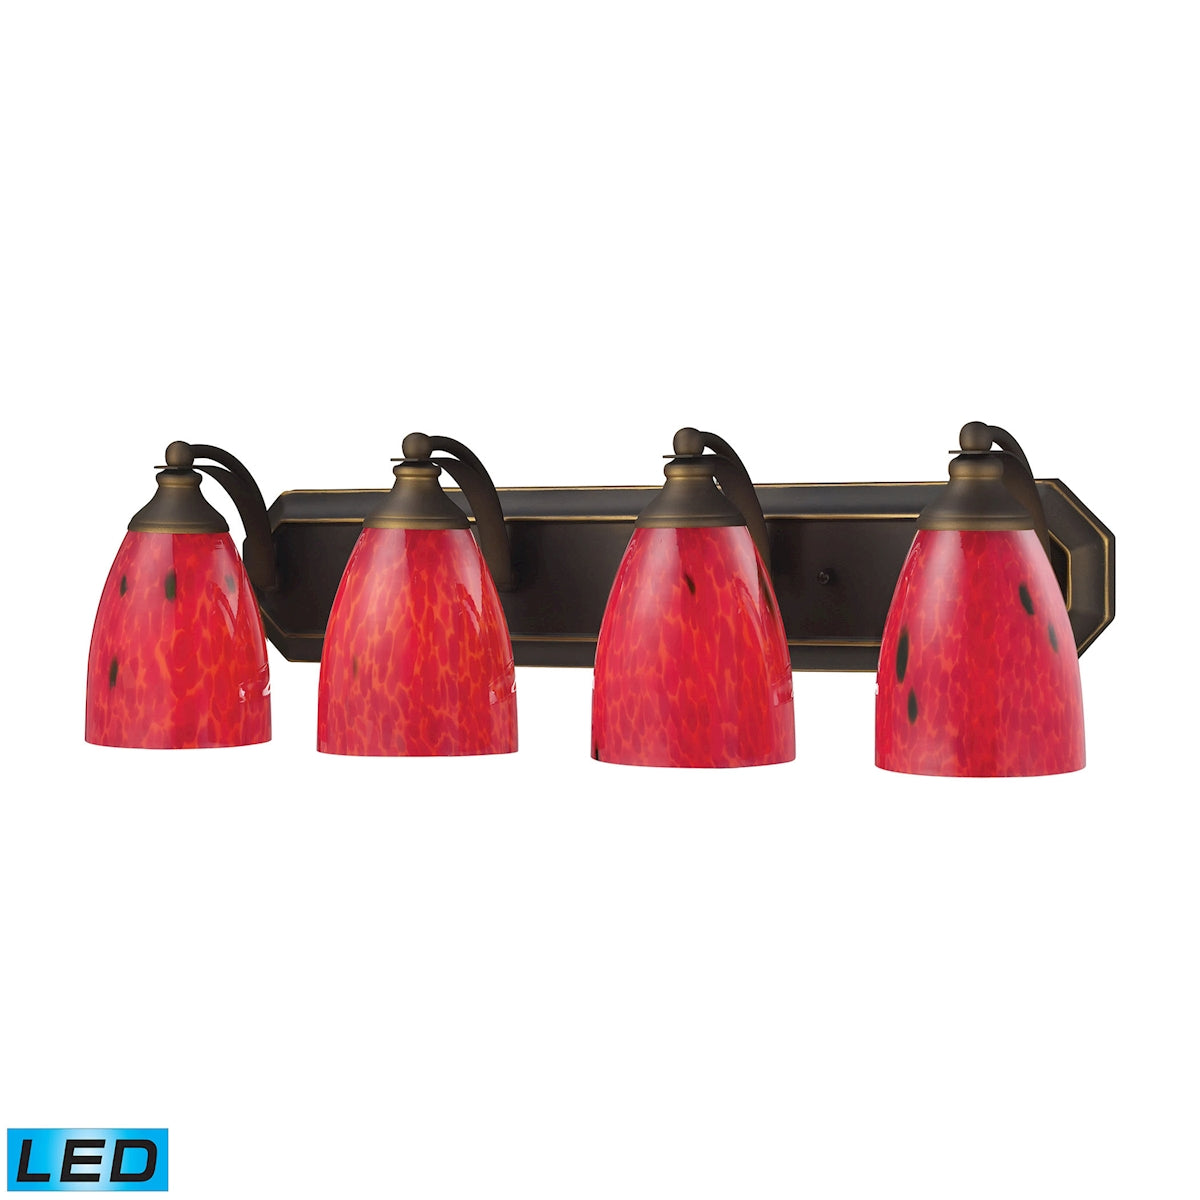 ELK Lighting 570-4B-FR-LED Mix-N-Match Vanity 4-Light Wall Lamp in Aged Bronze with Fire Red Glass - Includes LED Bulbs